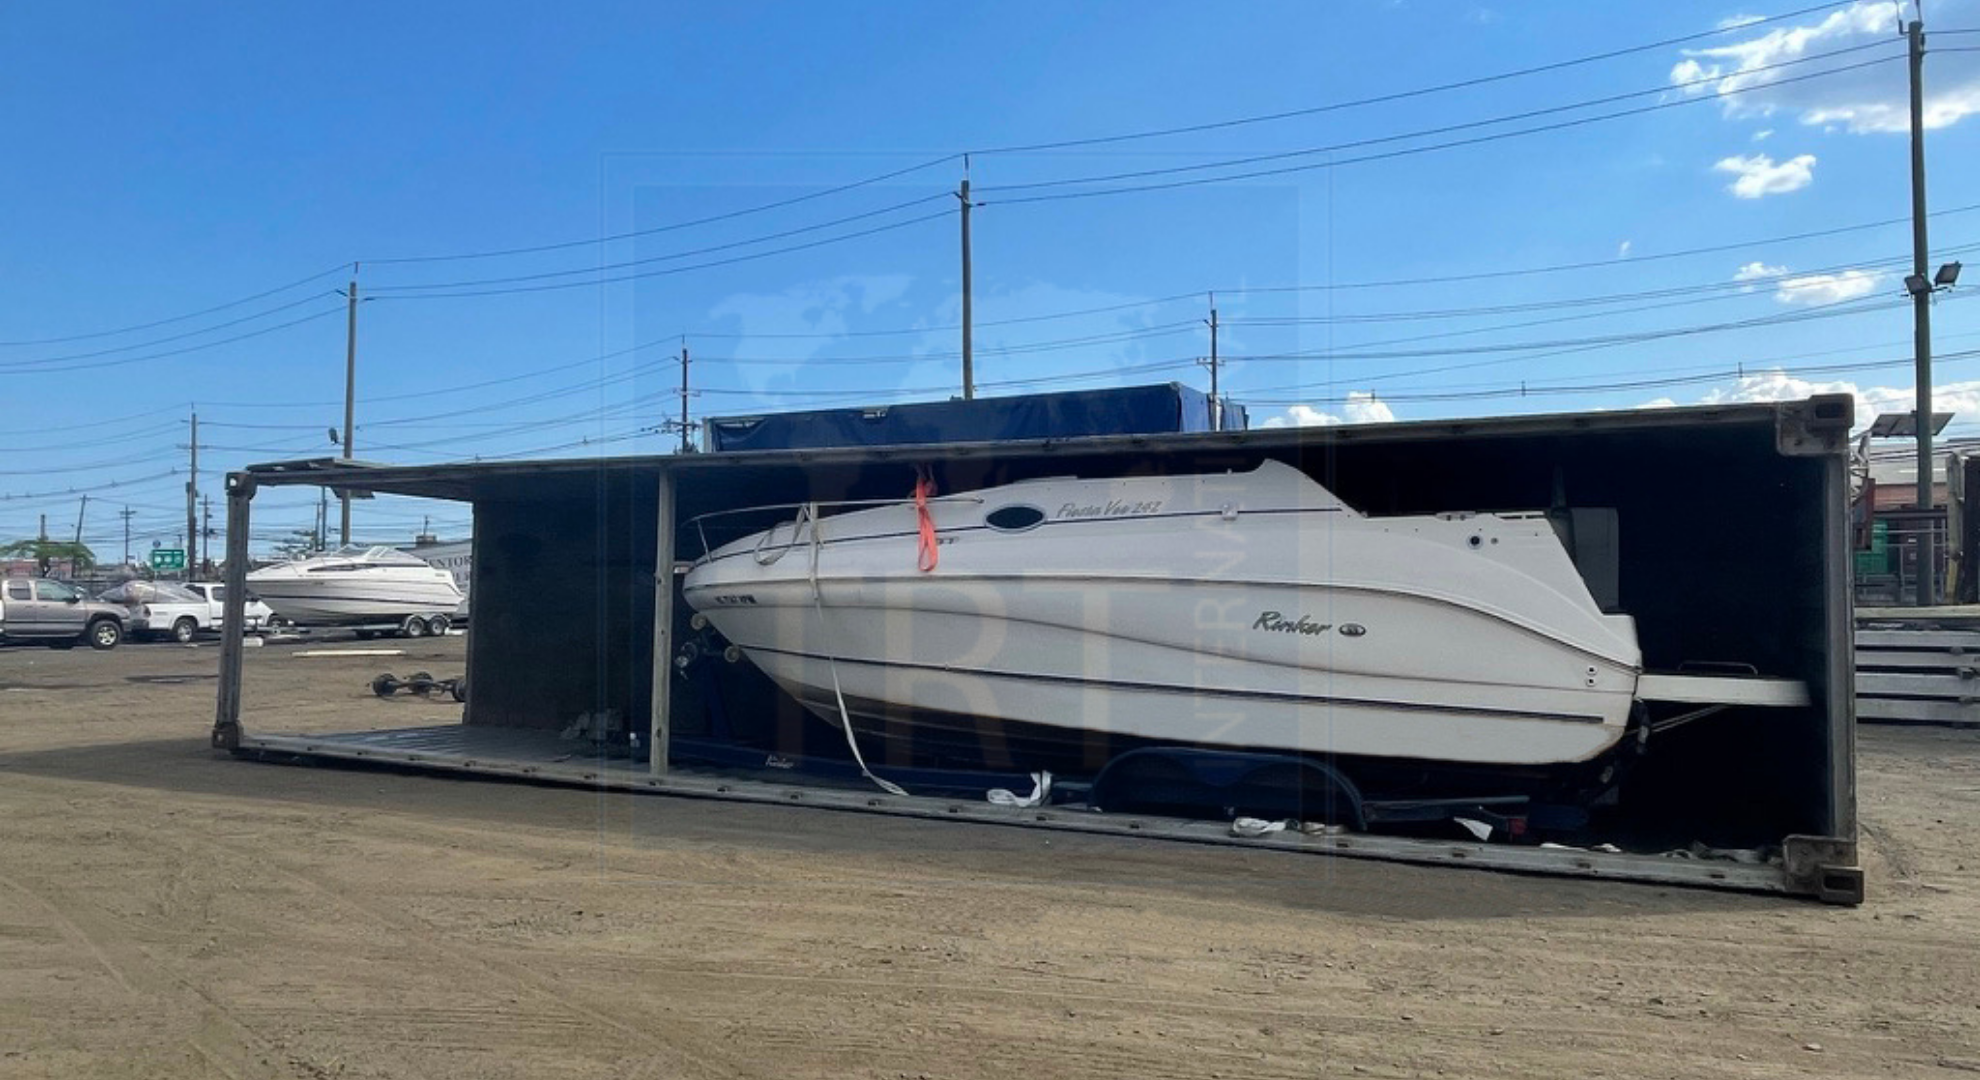 Buy used boat from USA auction